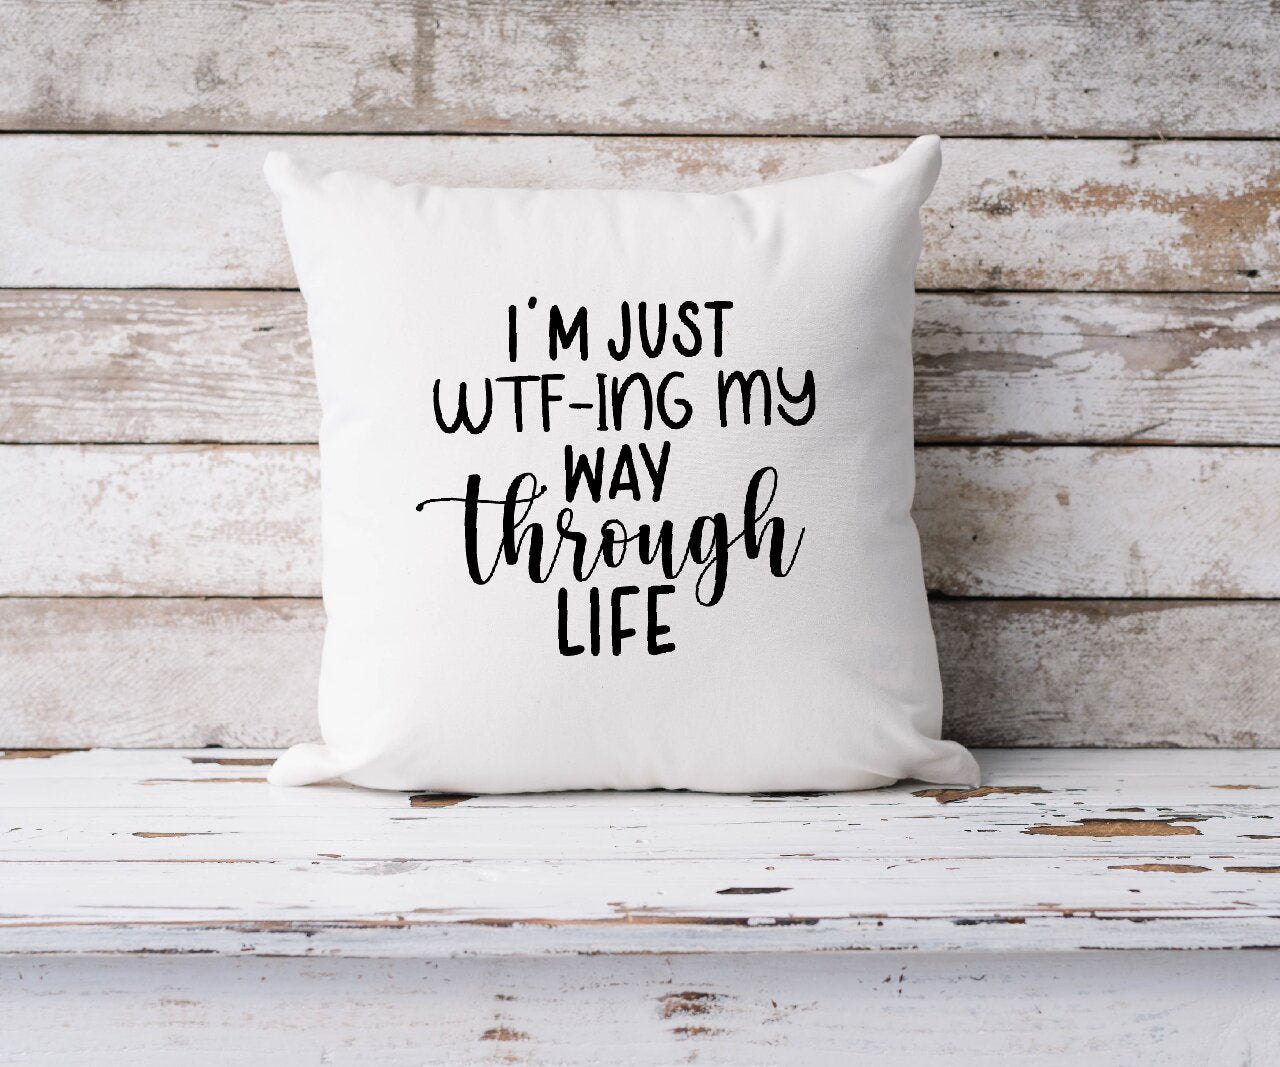 I'm Just WTF-ING My Way Through Life - Cushion Cover